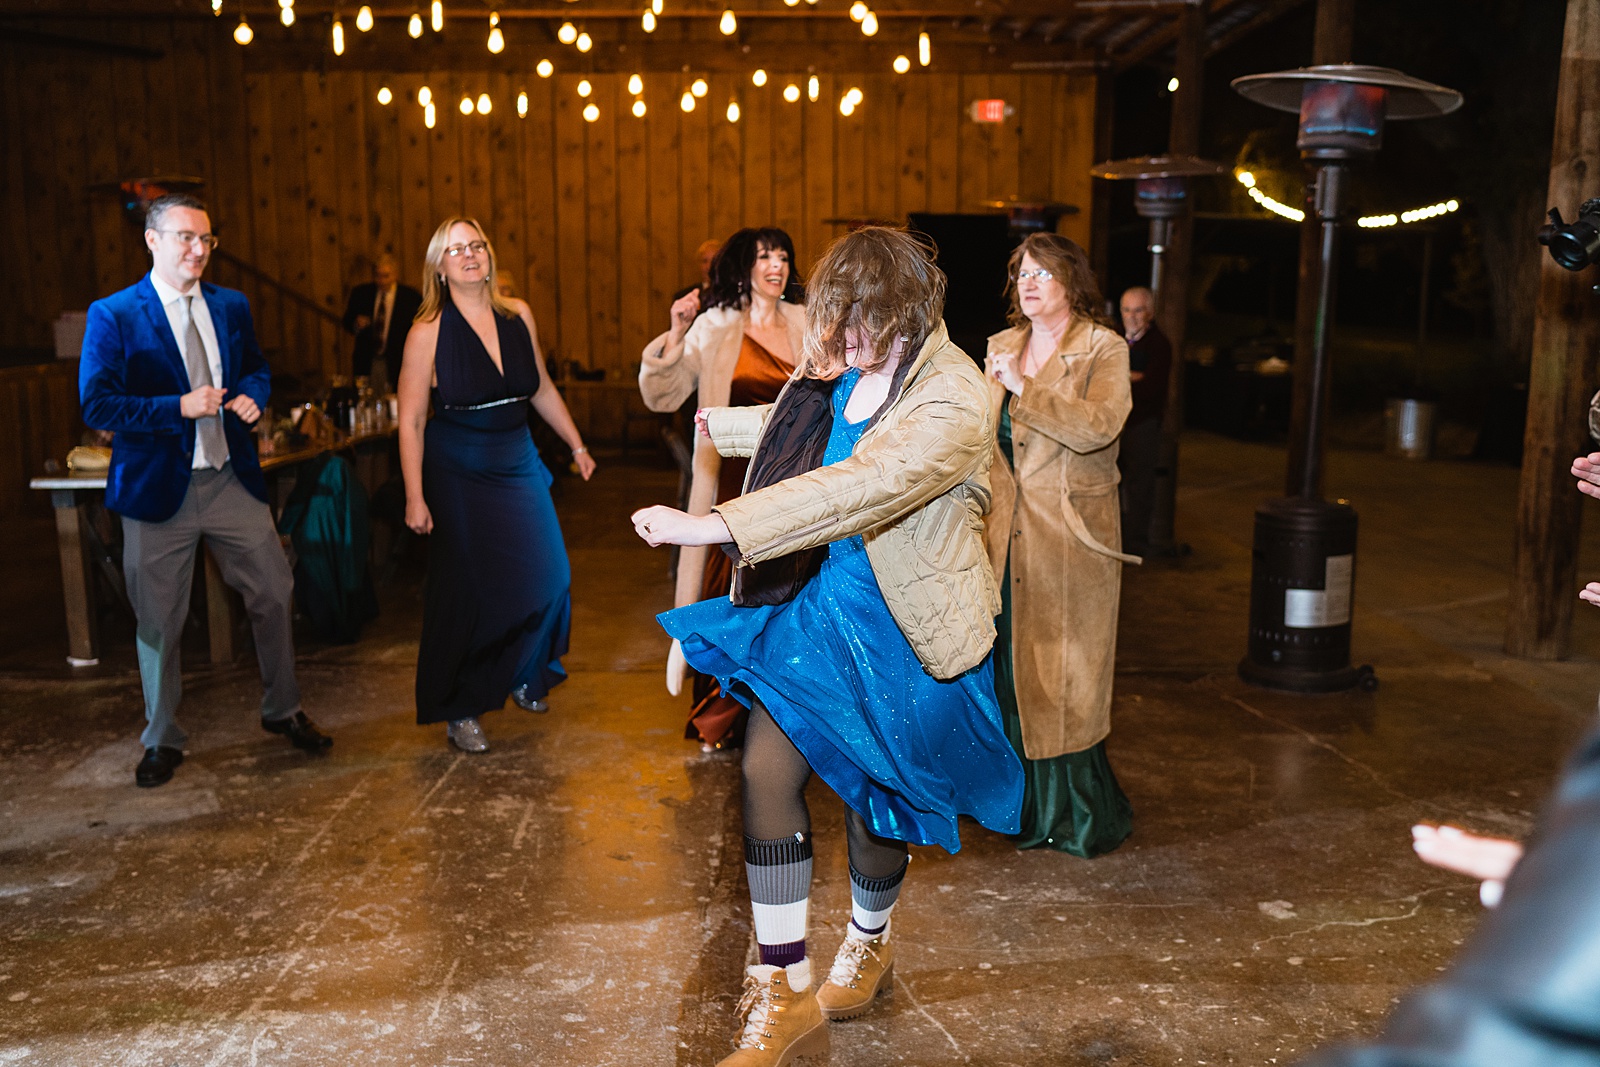 guests dancing at Mortimer Farms wedding reception by Prescott wedding photographer PMA Photography